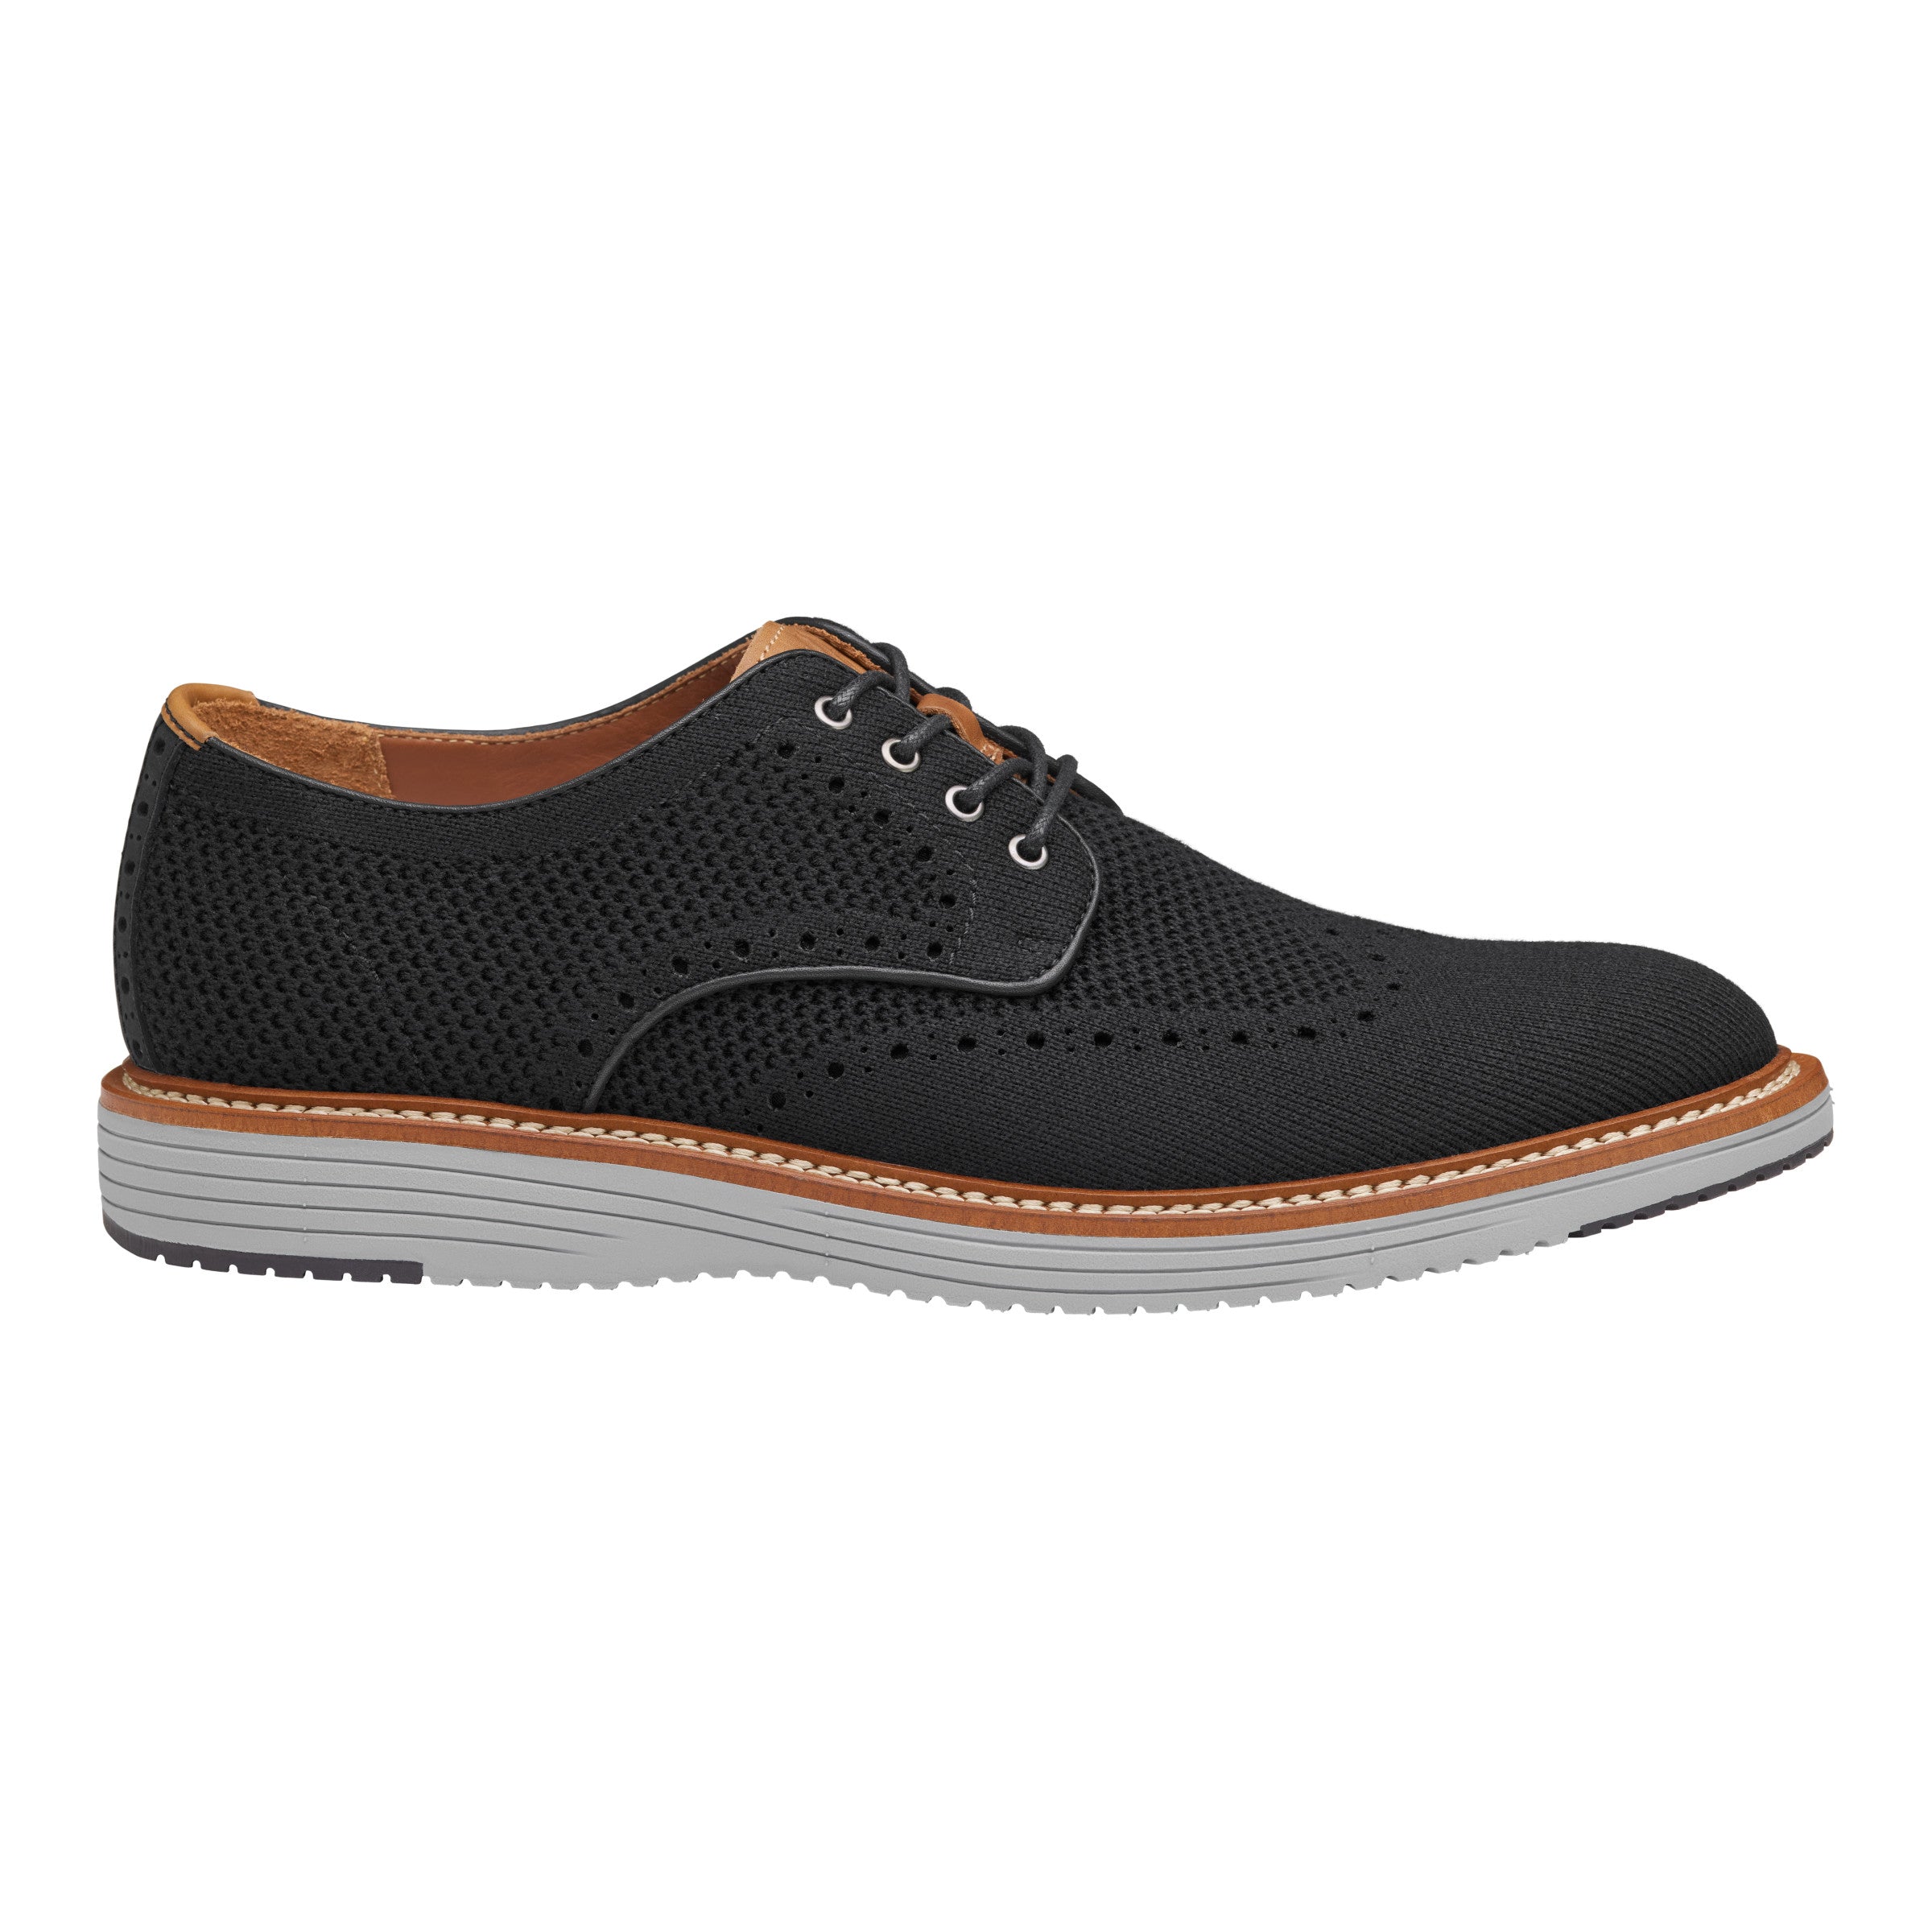 Incredibly light and flexible in airy knit with leather trim. Refined details including double-stitched leather welt, vachetta leather accents, and contrast welt stitching.  Leather/anti-microbial mesh lining.  Removable, molded memory-foam cushioned insole.  TRUFOAM sole for lightweight comfort.